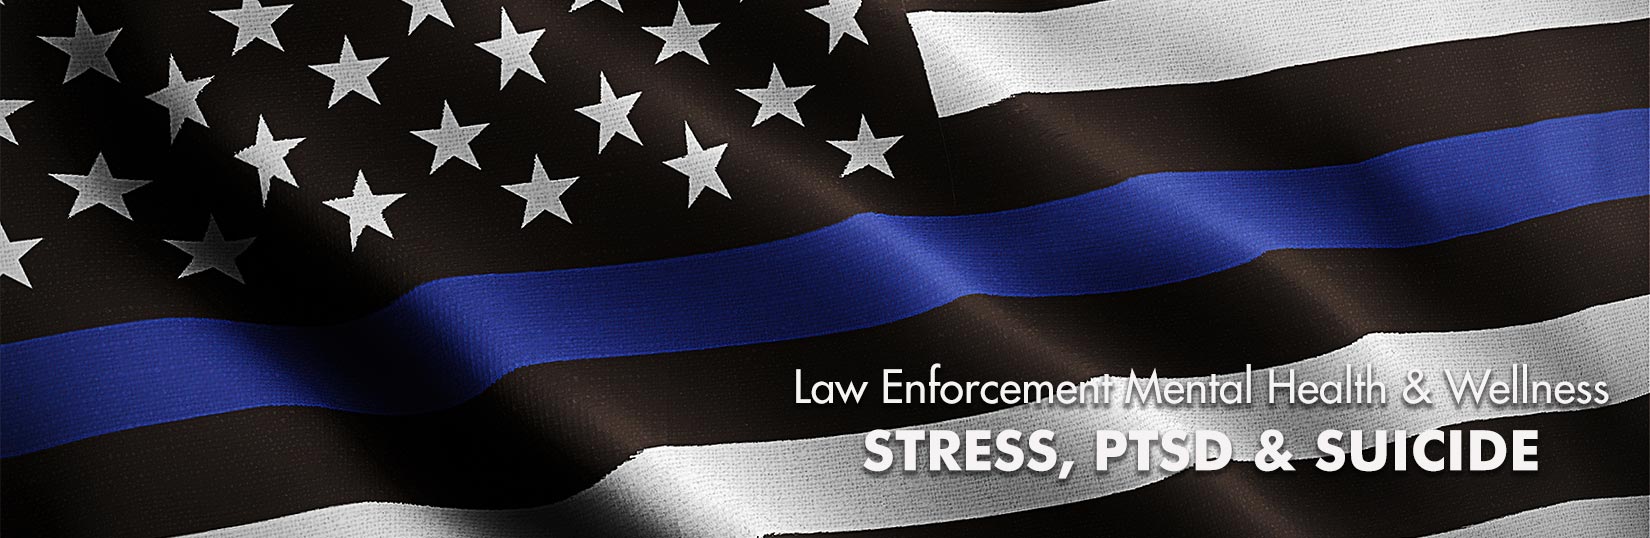 Law Enforcement, Police Mental Health Wellness Resources - Dream Chaser